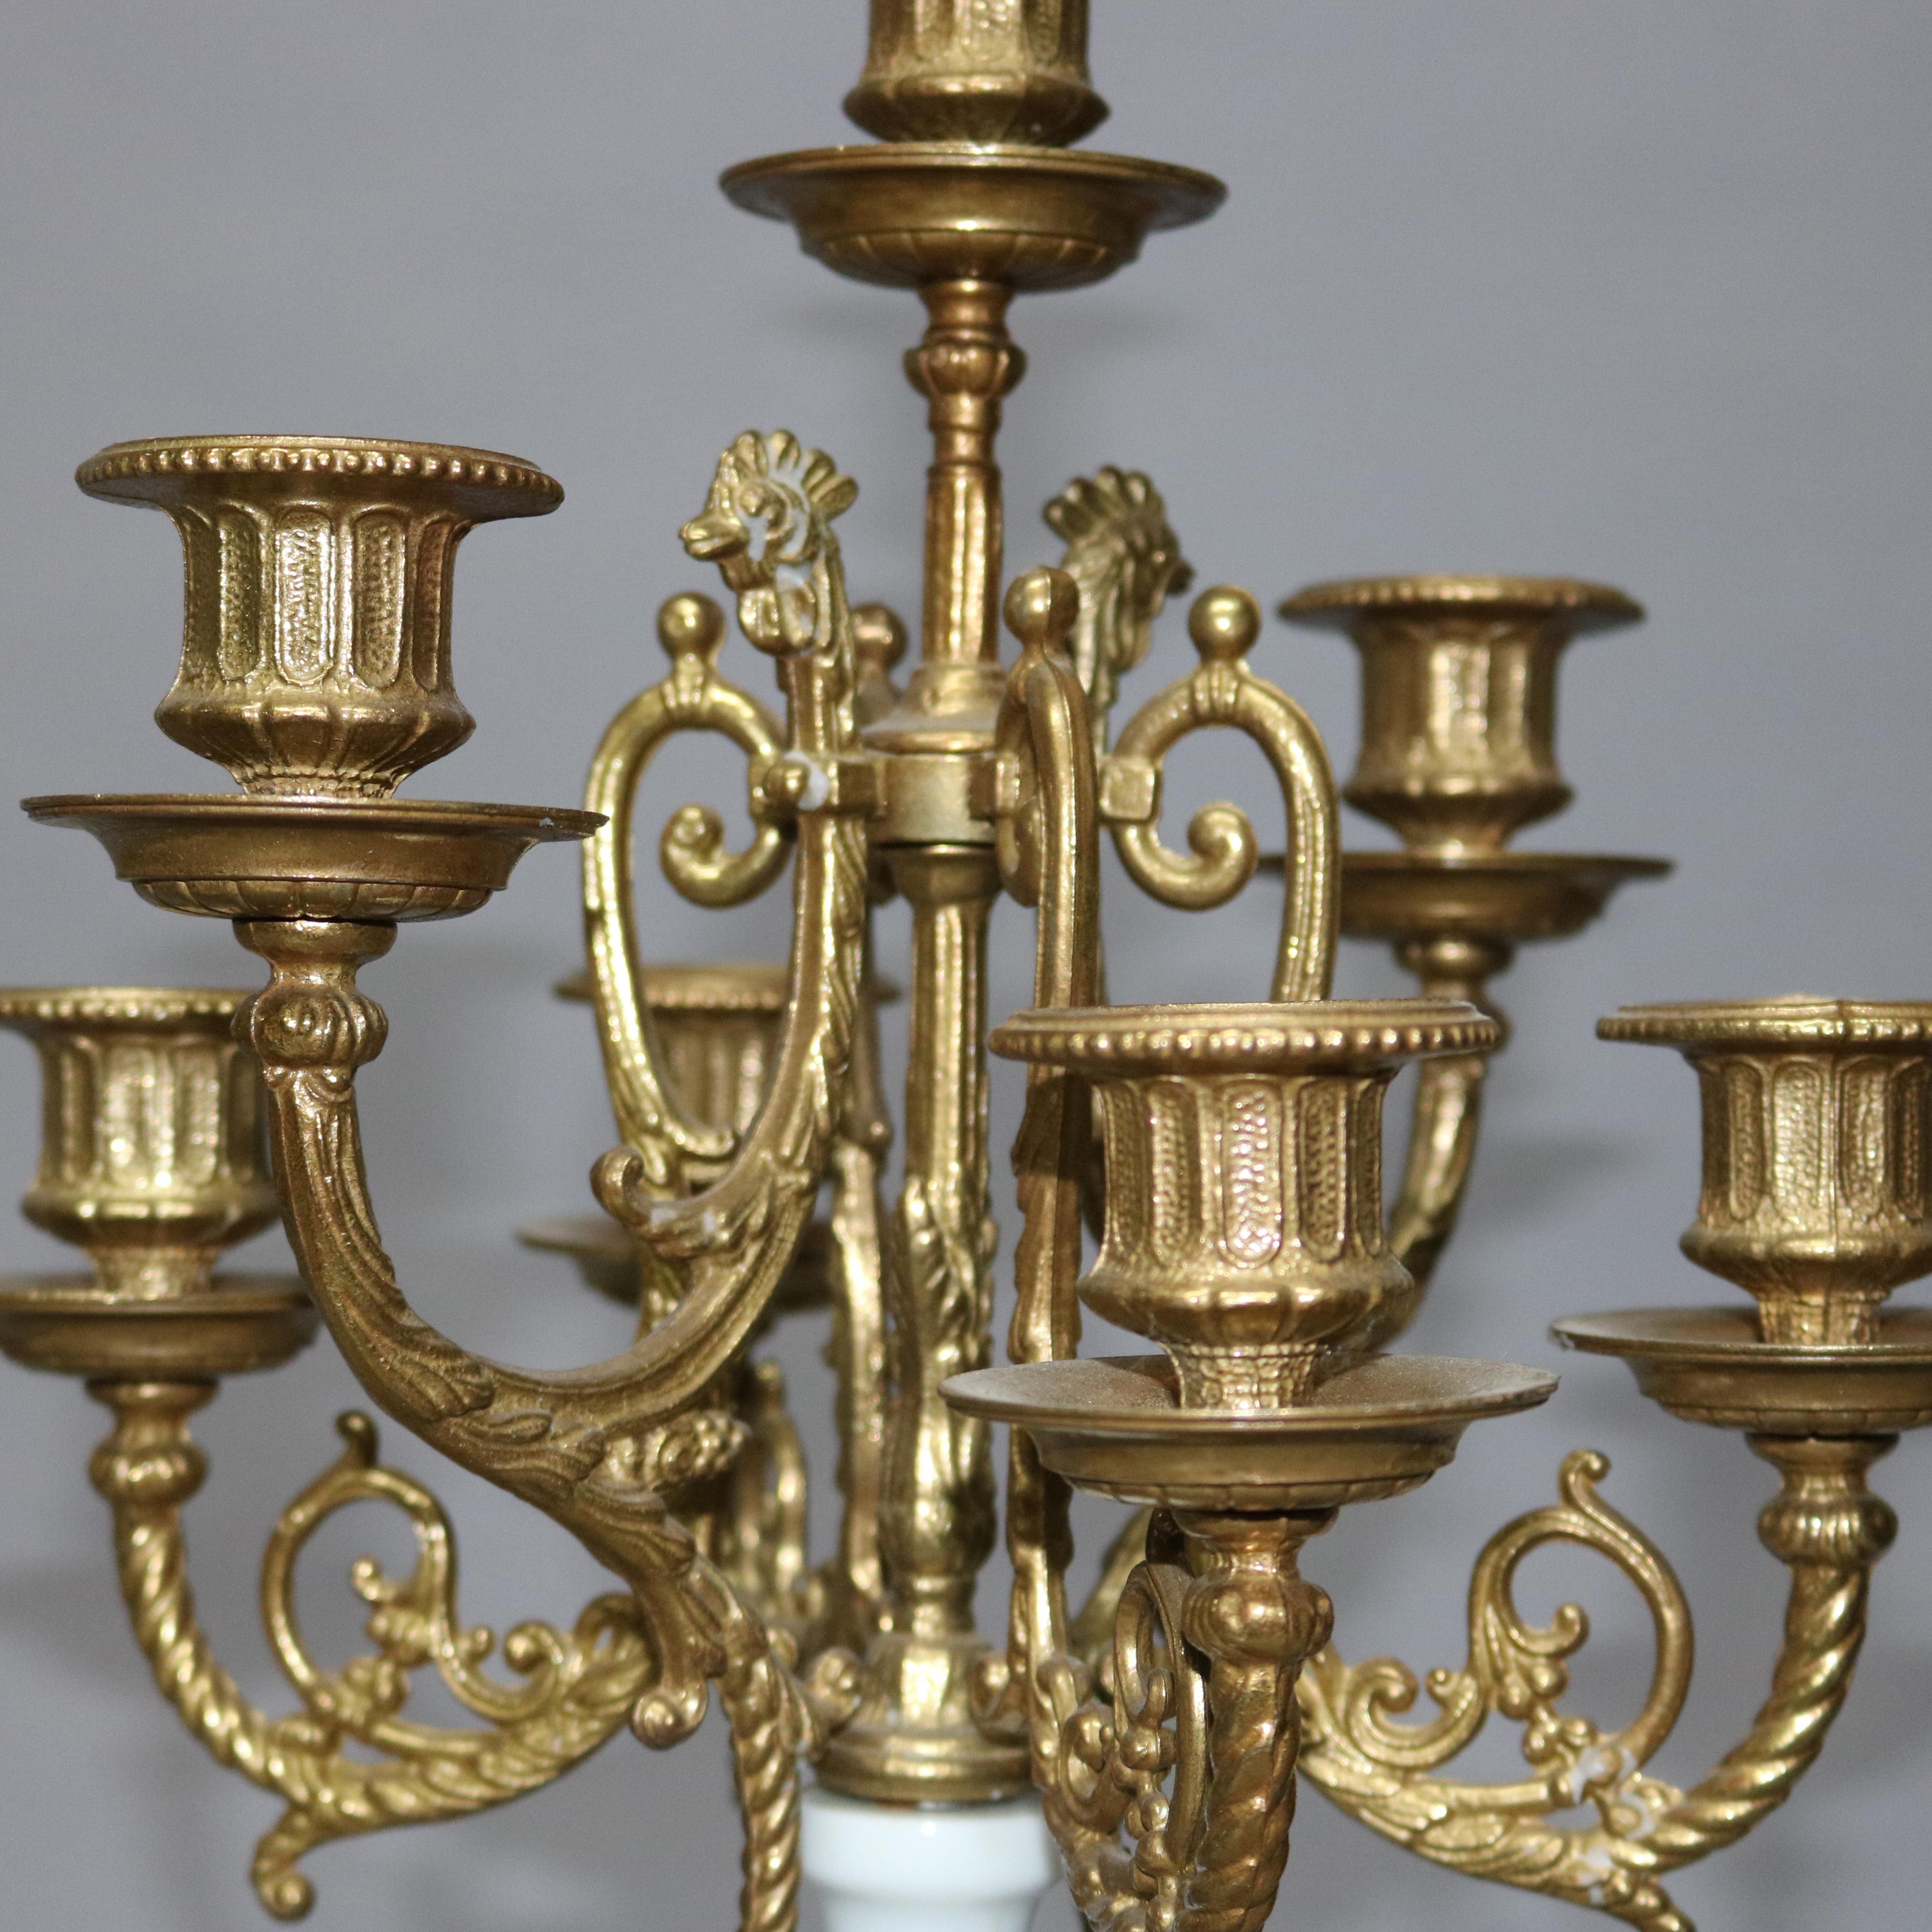 A vintage pair of Italian figural candelabra by Brevettato offers scroll and foliate form gilt metal arms terminating in candle sockets surmounting porcelain urn form column with classical cherub mounts, raised on marble plinth with cast claw foot